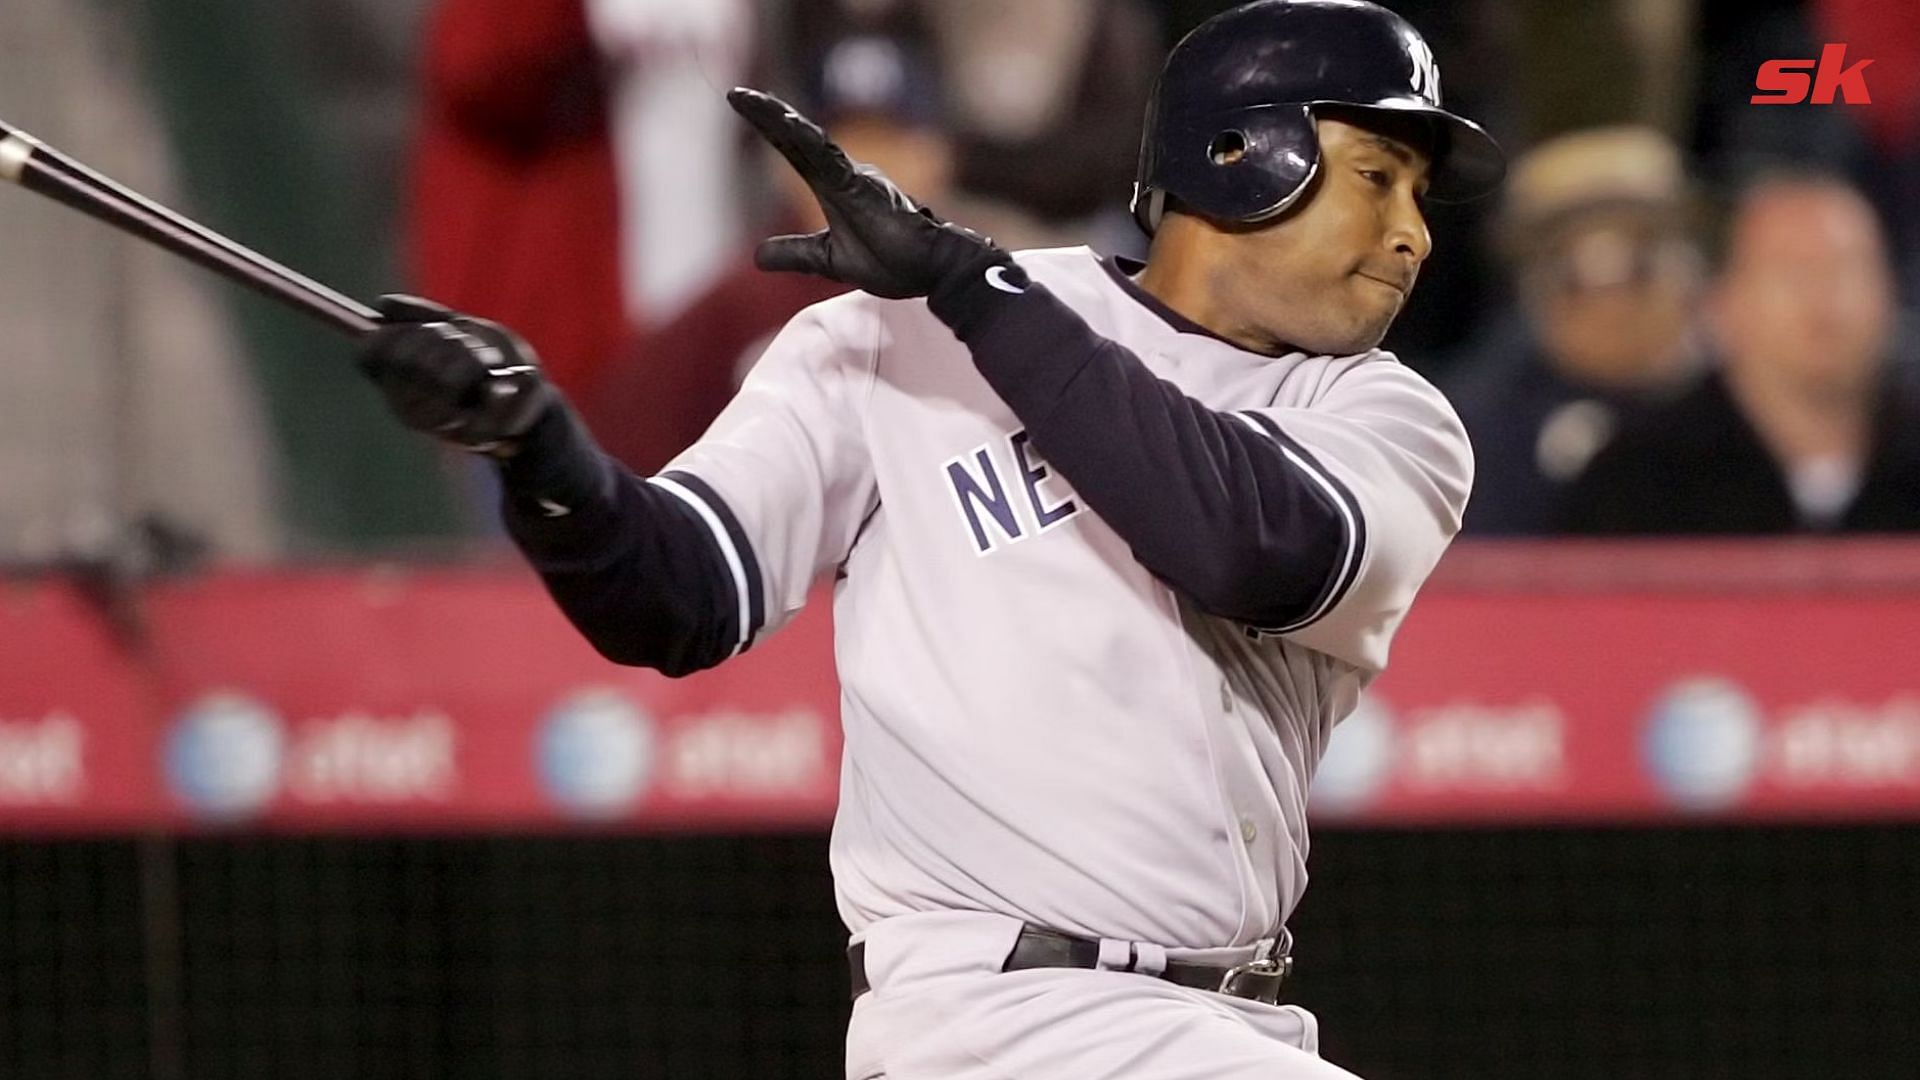 When Bernie Williams was accused of attacking a woman in a bar